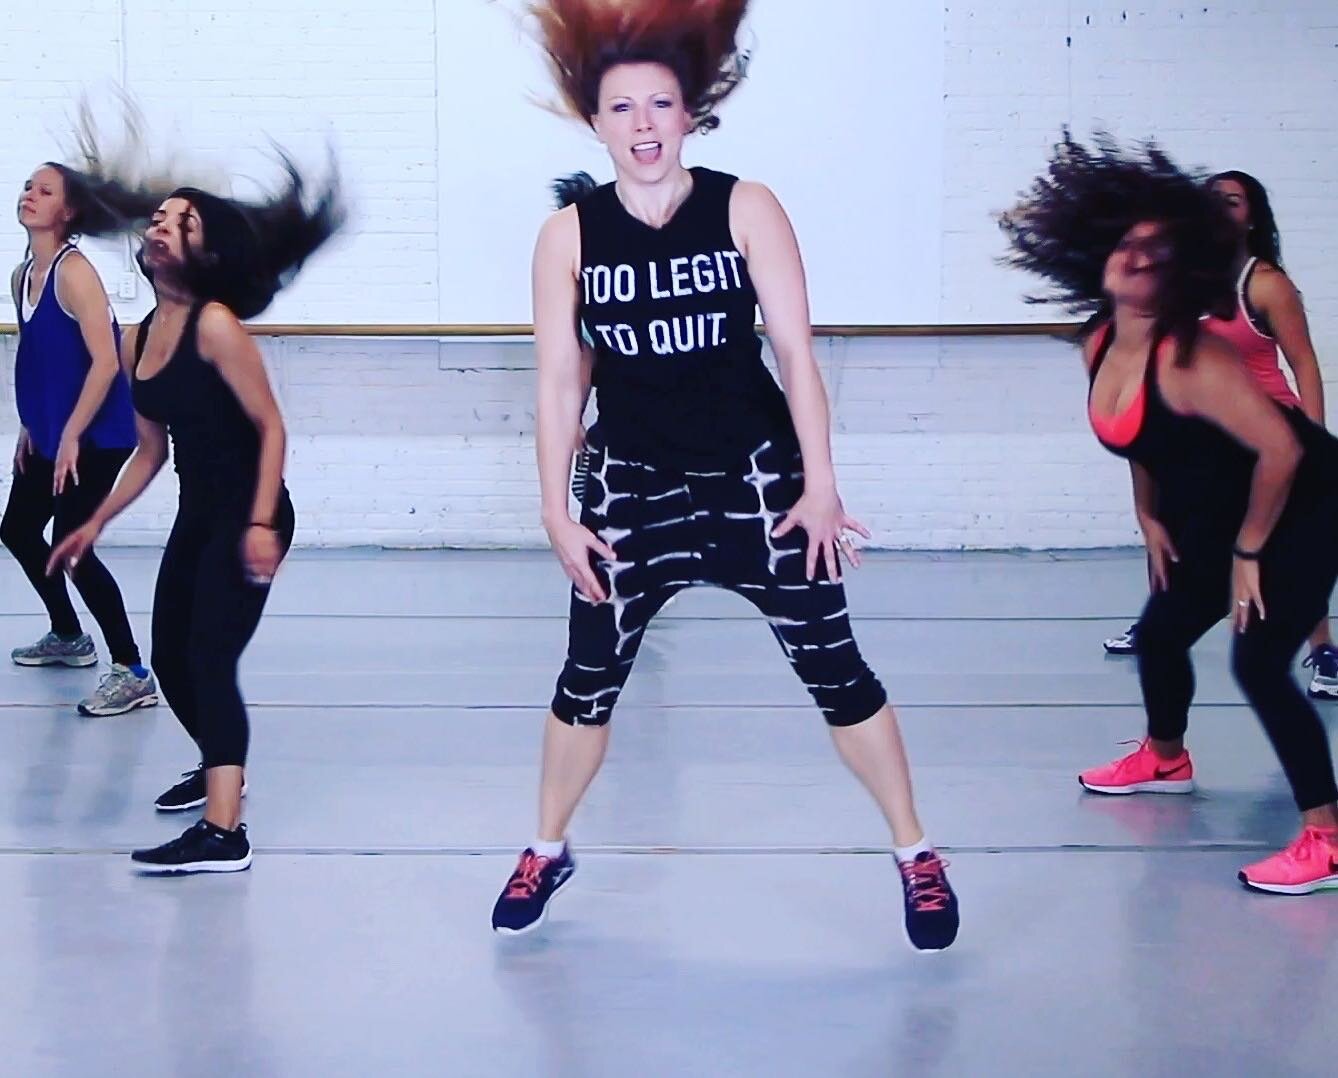 ⭐️FITPOP is still &quot;Too Legit to Quit&quot;⭐️We've taken a break, but we are back! (We never stopped dancing, we just stopped posting:). ⁠
⁠
But now we want to open up our opportunities and doors for more online dance fitness goodness...⁠
⁠
Stay 